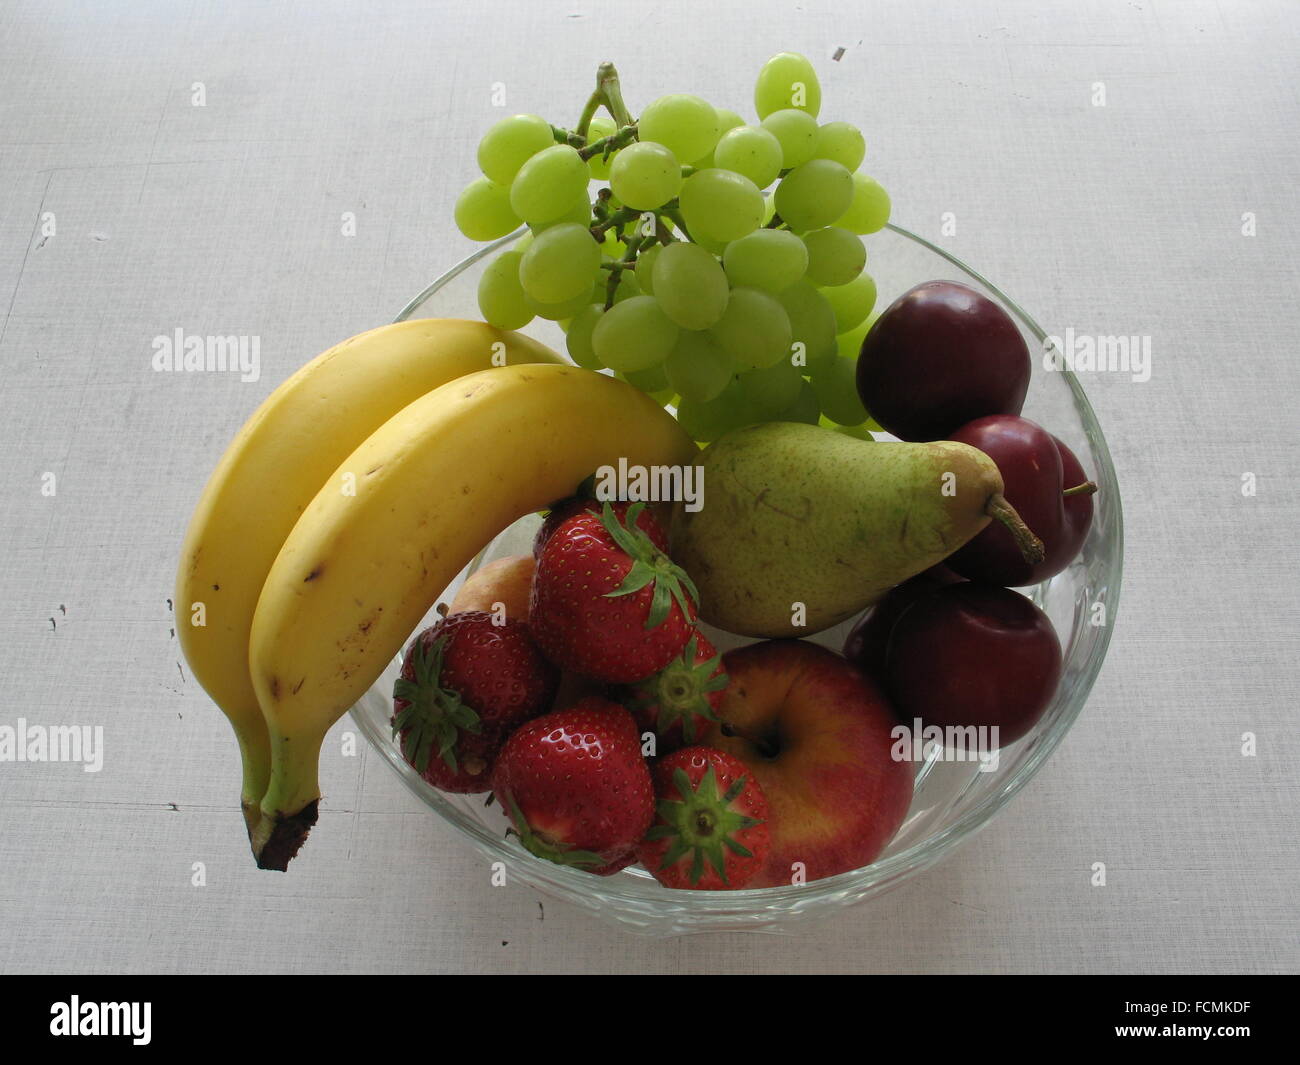 dish with fruits on a table Stock Photo